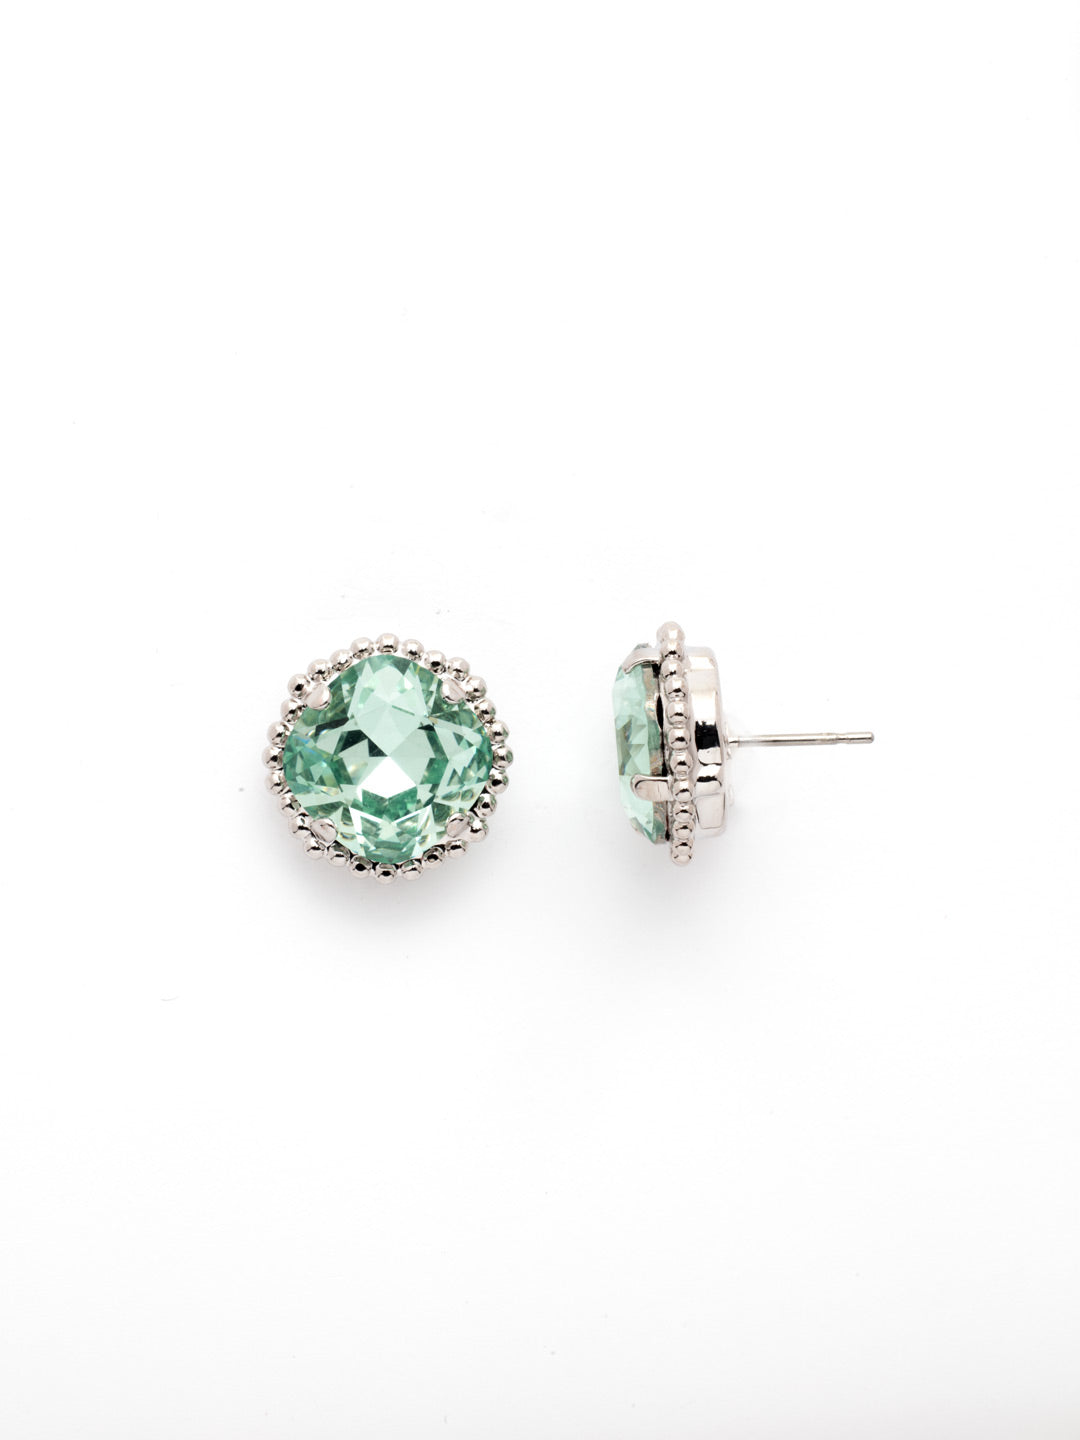 Cushion-Cut Solitaire Stud Earrings - EBX10RHMIN - All around allure; the Cushion-Cut Solitaire Stud Earring features a rounded-edge, cushion cut stone that is encircled by a vintage inspired decorative, edged border. A post backing ensures comfortable, everyday wear. From Sorrelli's Mint collection in our Palladium Silver-tone finish.